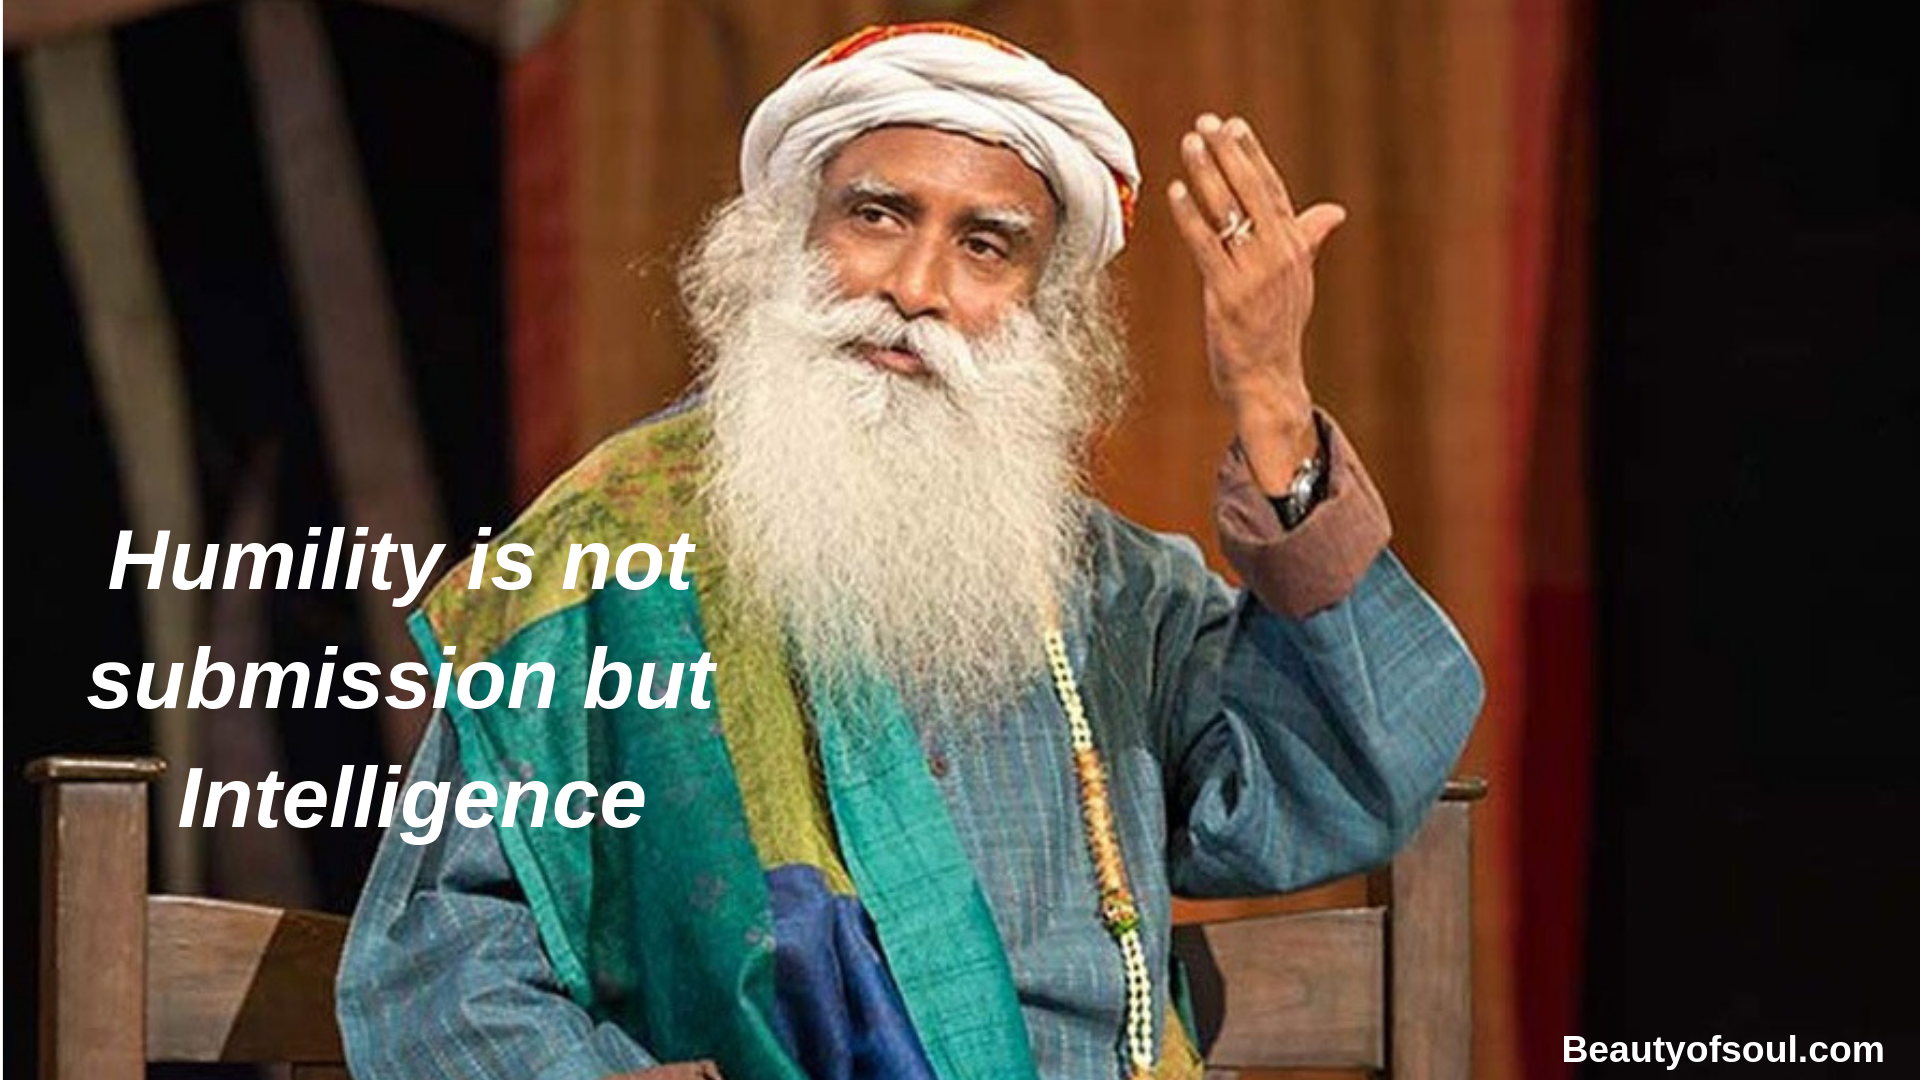 Sadhguru - Humility is not submission but Intelligence